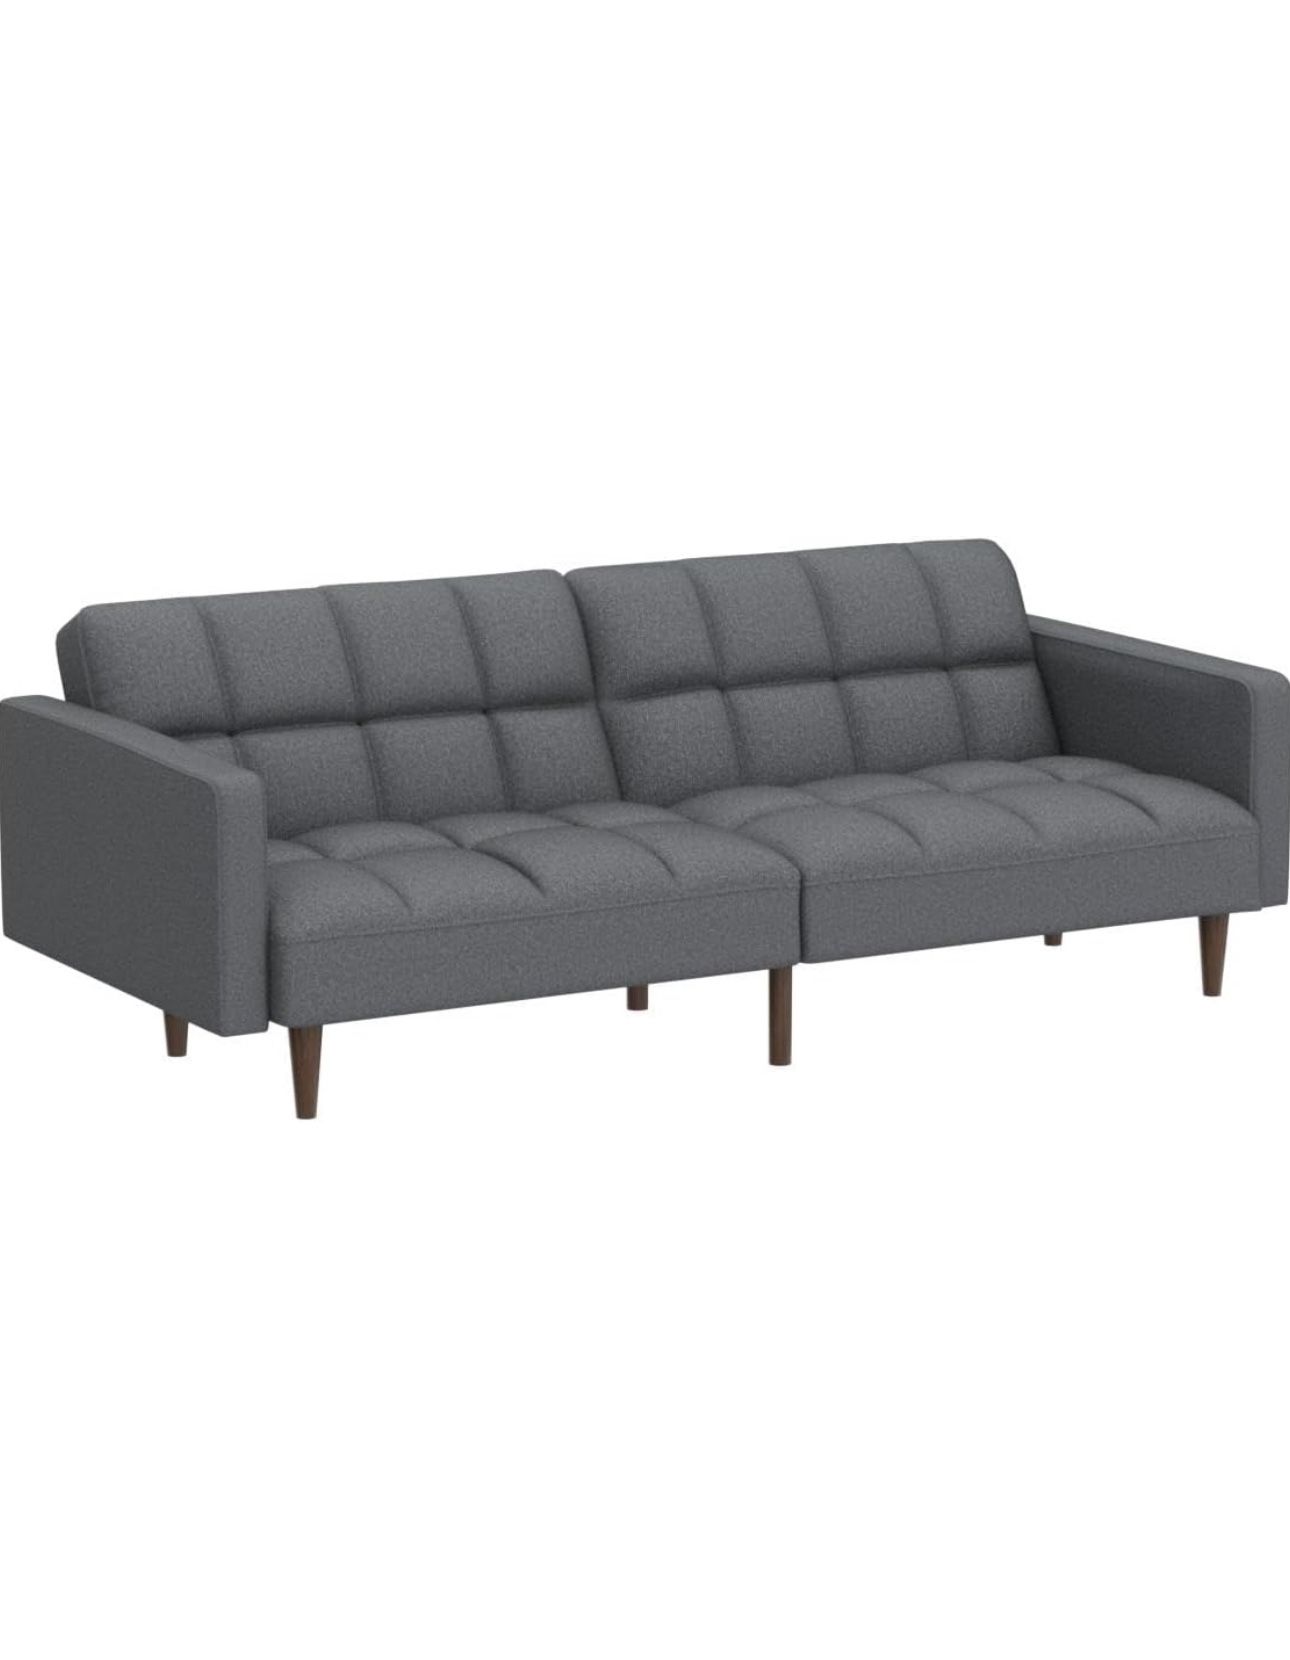 mopio Aaron Couch, Small Sofa, Futon, Sofa Bed, Sleeper Sofa, Loveseat, Mid Century Modern Futon Couch, Sofa Cama, Couches for Living Room